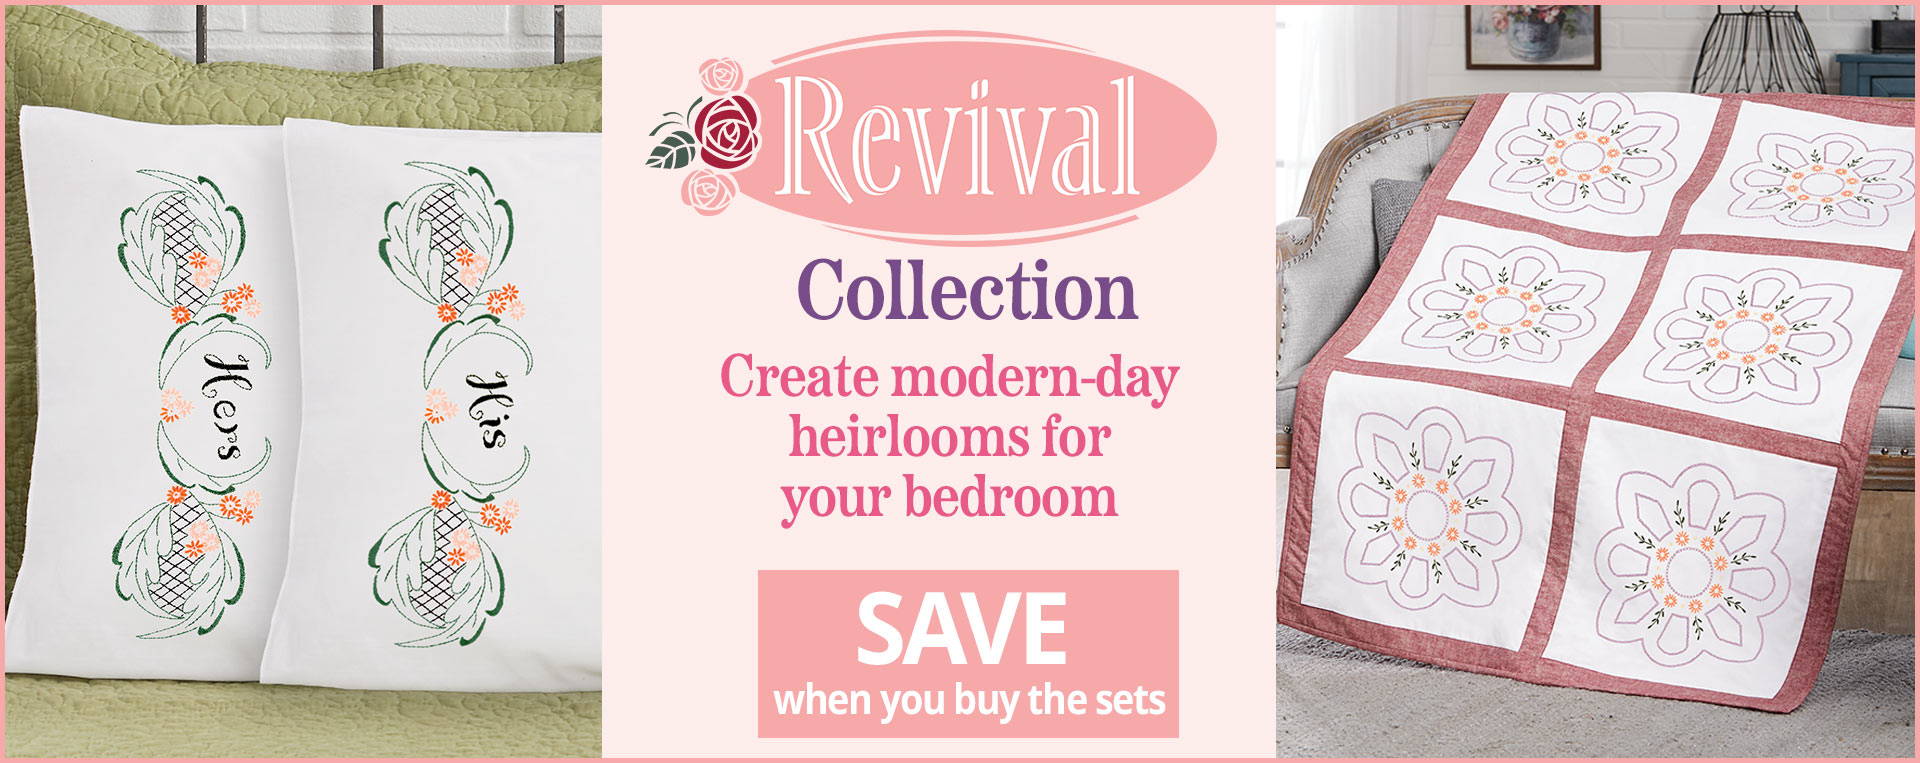 Revival Collection. Images: Featured Needlework from Revival Collection